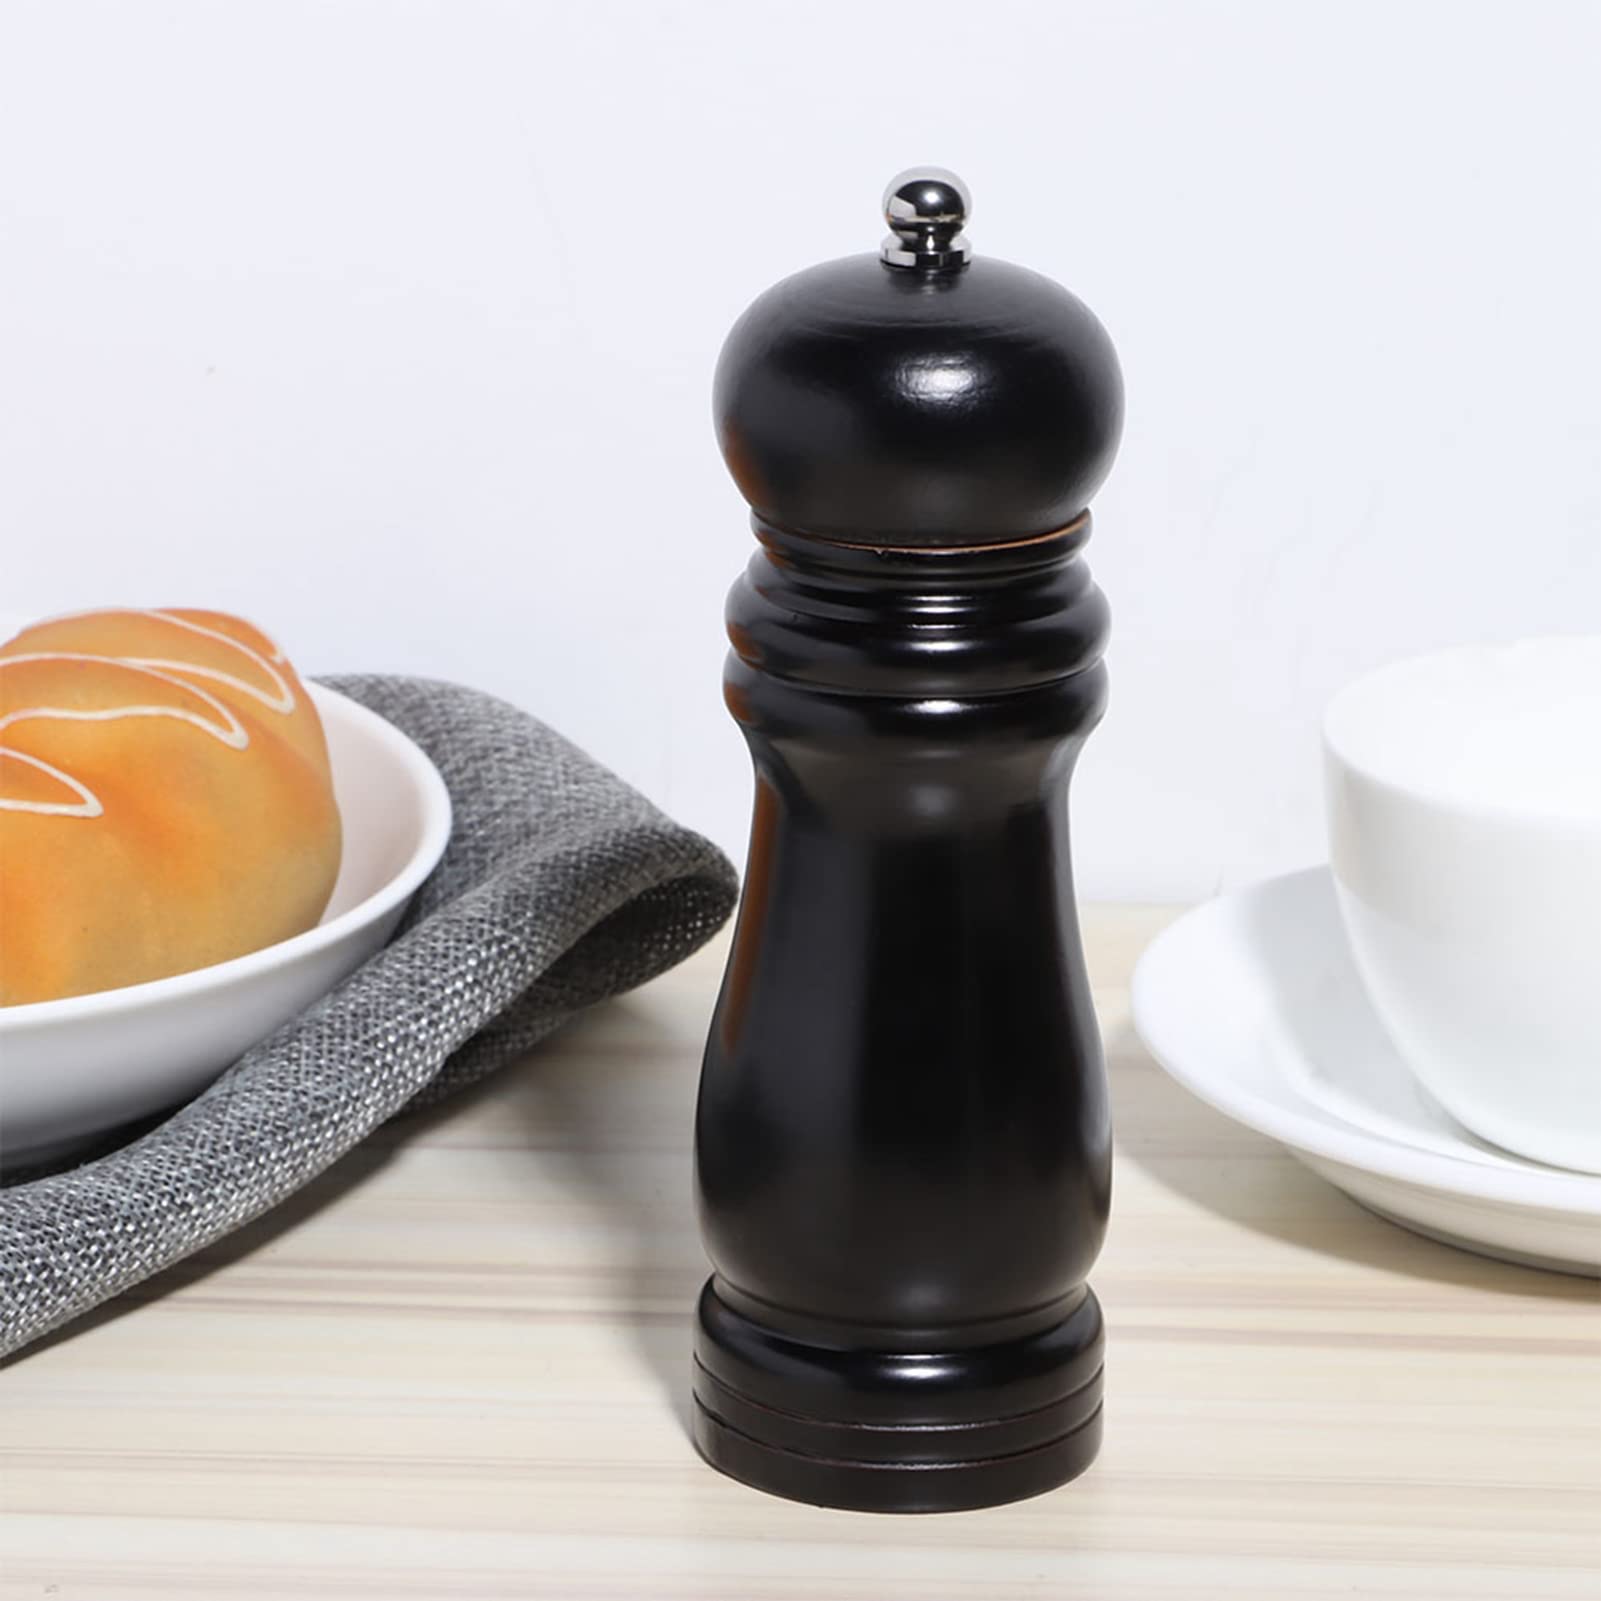 Wood Pepper Grinder Pepper Mill, 6 inch Durable Manual Pepper Mill with Adjustable Upper Knob, Ergonomic Pepper Mill for Home Kitchens, Restaurants, Hotels